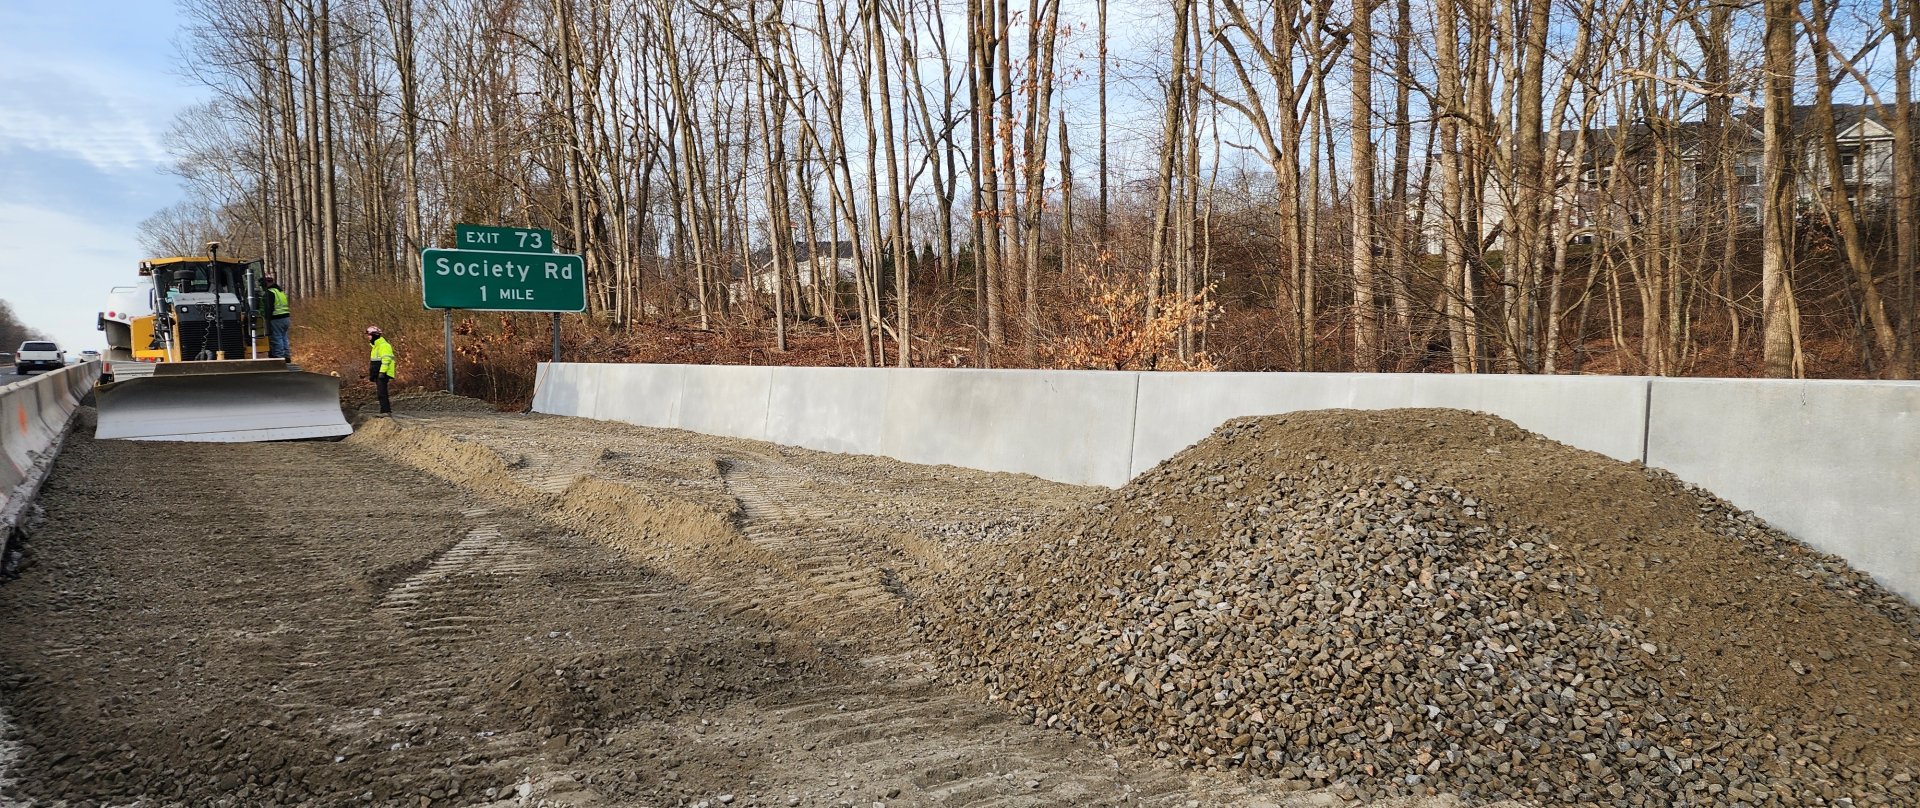 Retaining Wall 101 - Site 1 - Processed Aggregate Base